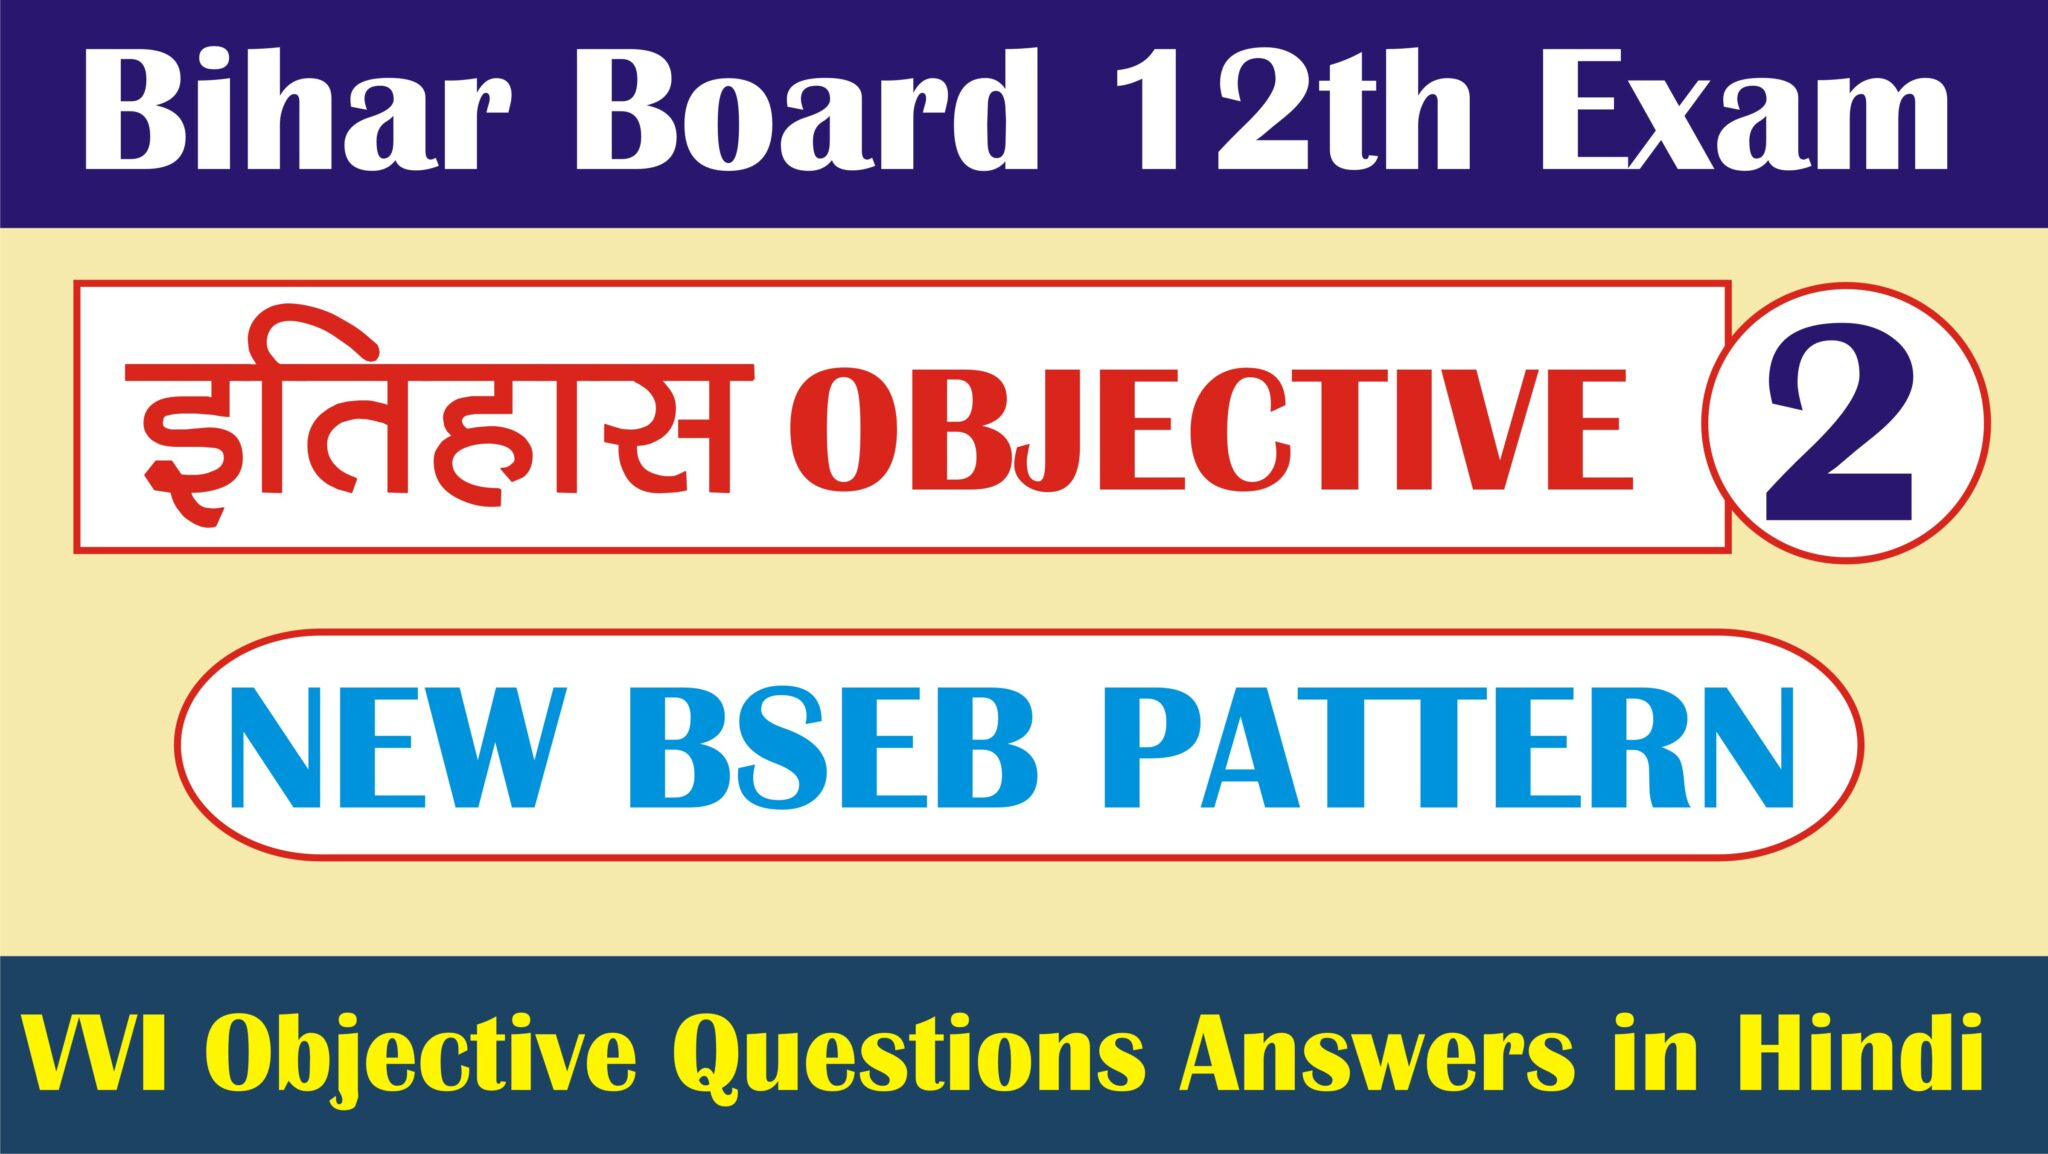 Bihar Board Class 12th History Chapter 2 Objective Questions Answers 